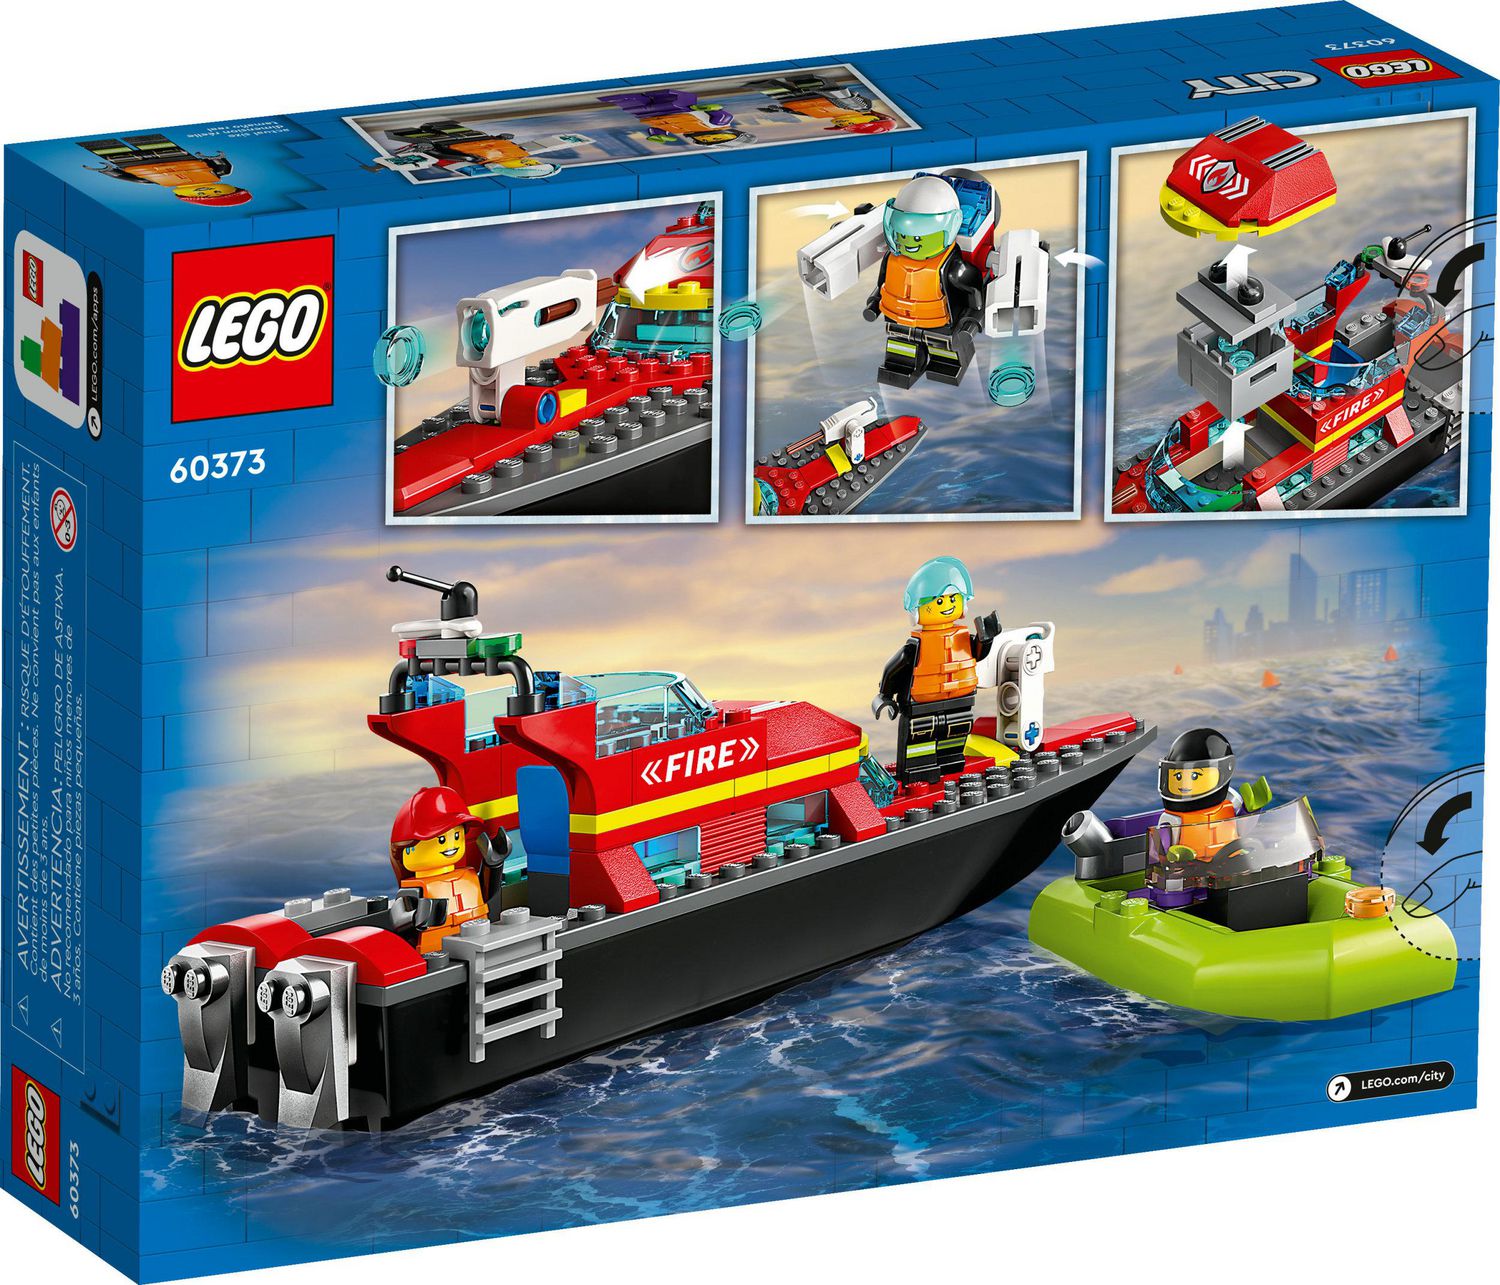 LEGO City Fire Rescue Boat 60373 Toy Boat that Floats on Water for